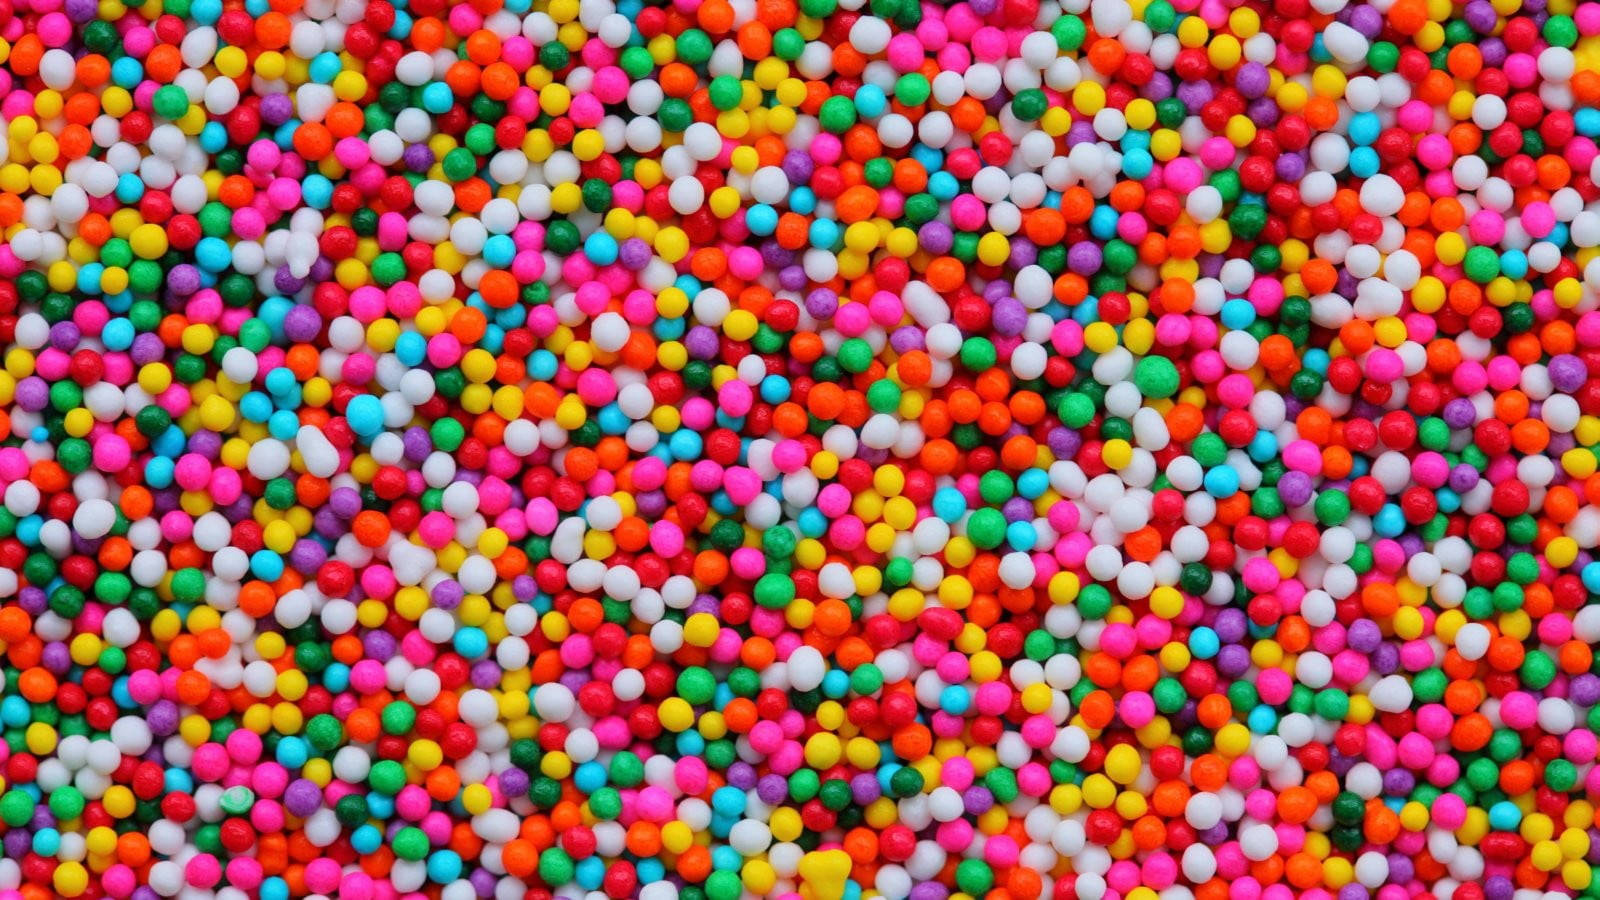 Colorful Candy Balls